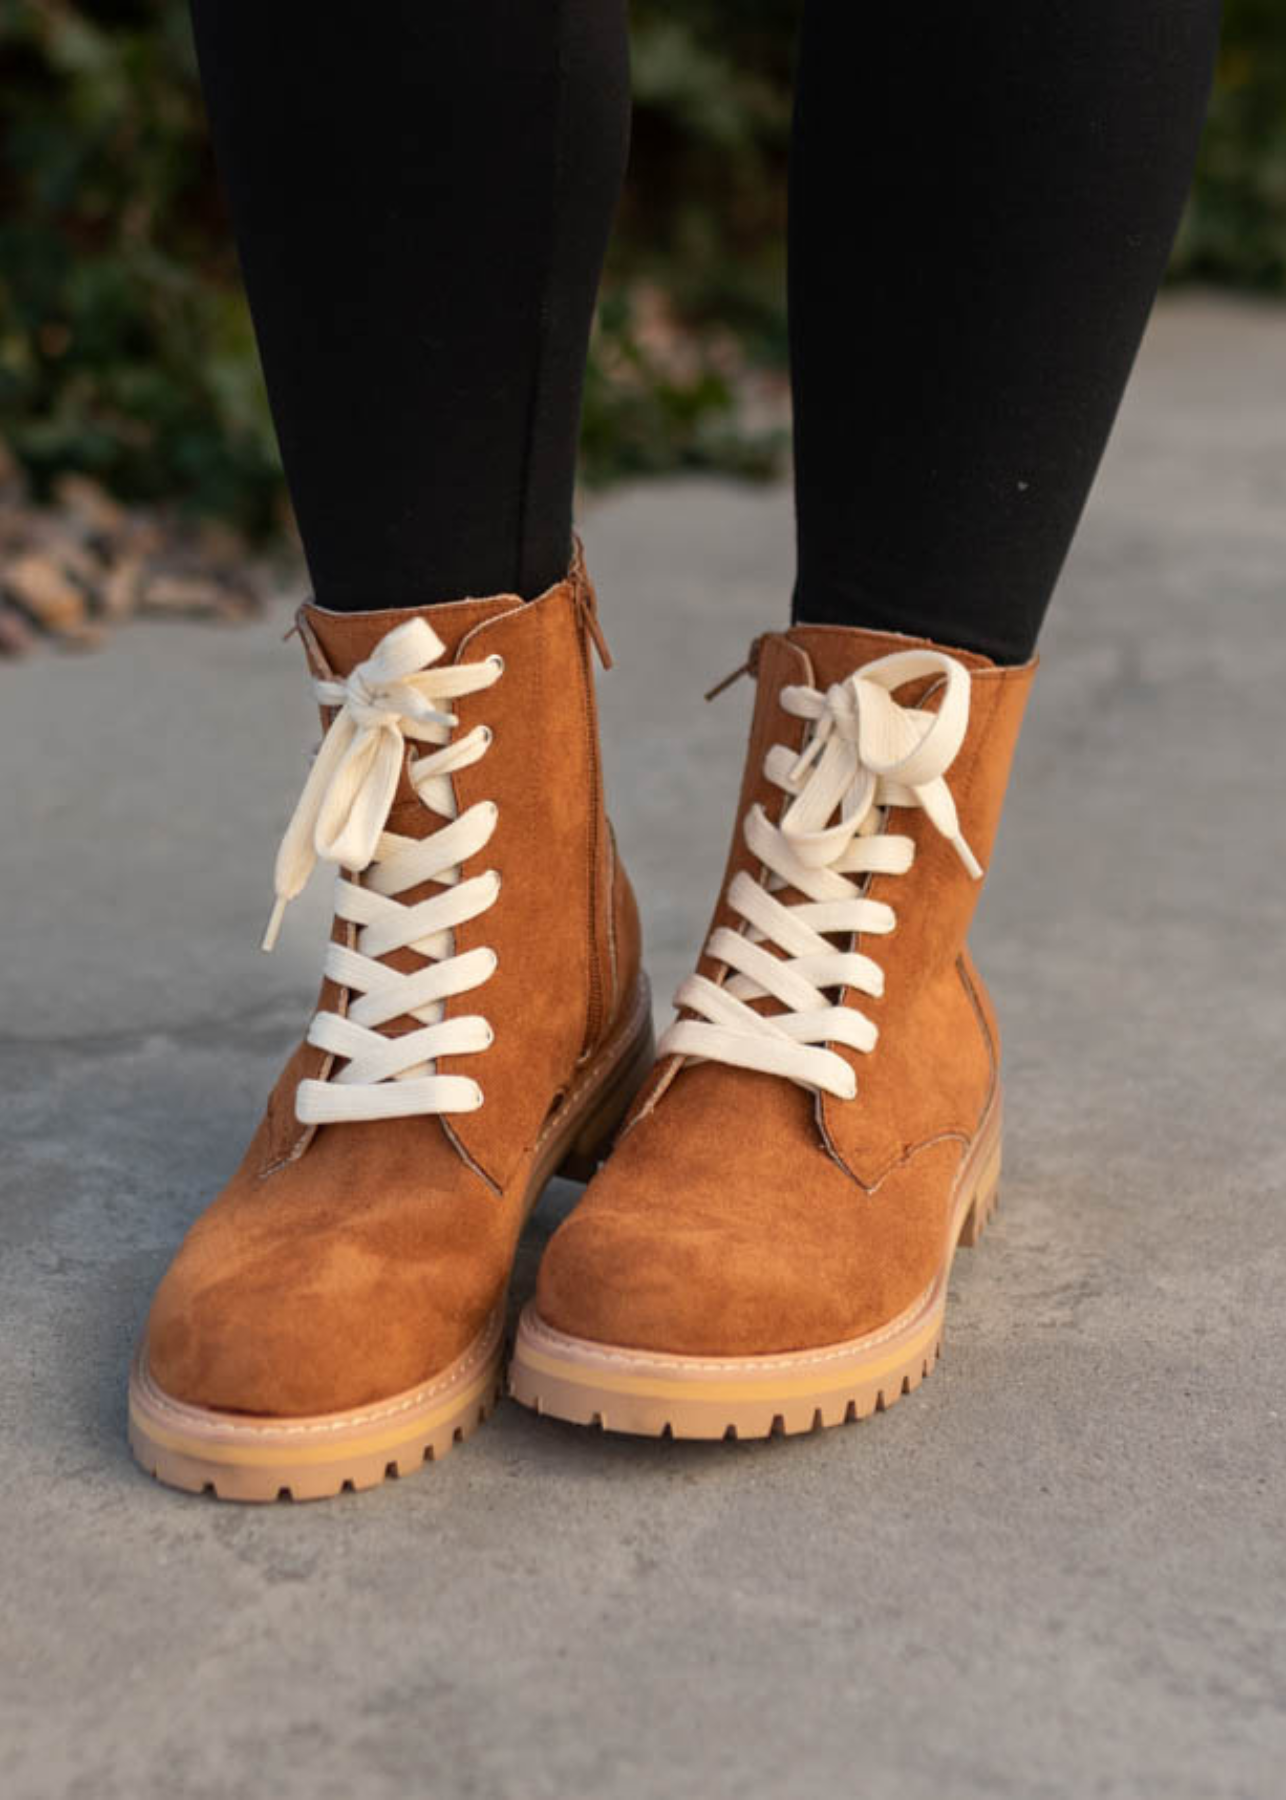 Camel lace up boots with zippers on the side